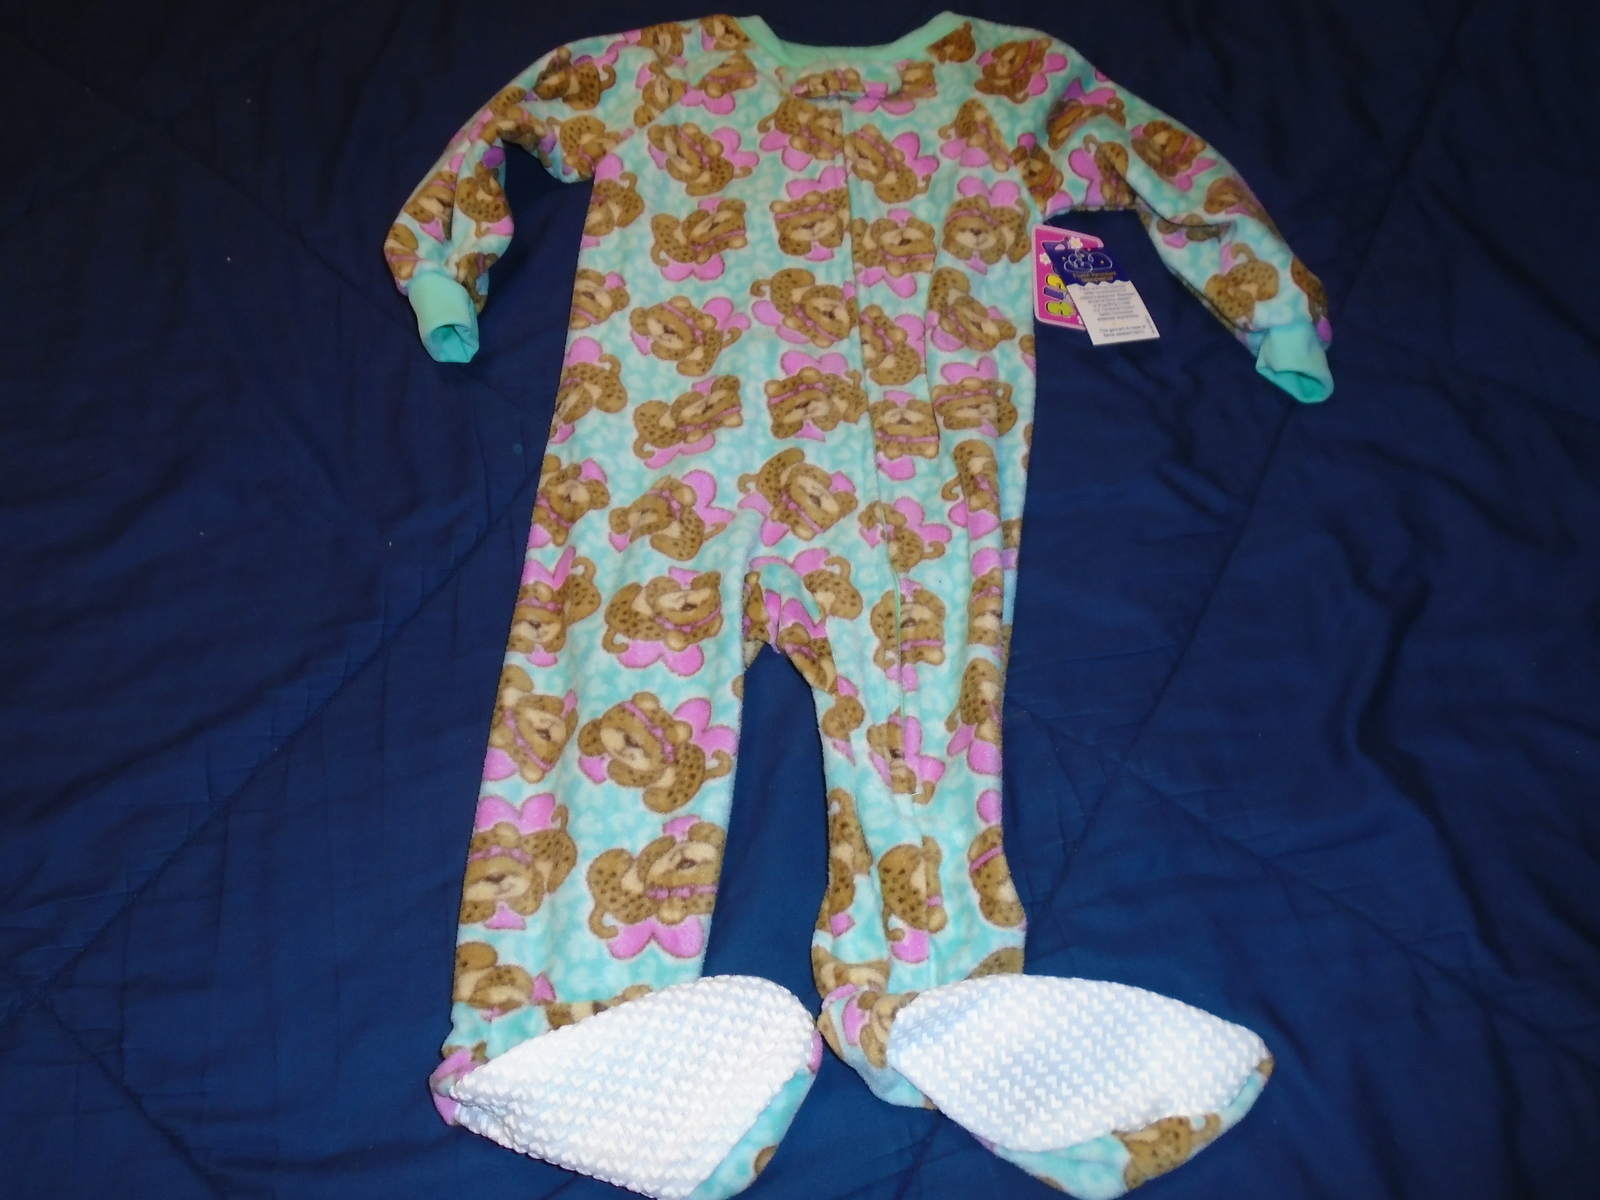 New Blanket Sleeper Size 2T-Mint Green w/Baby Leopards-Toddler Pajamas - $6.49